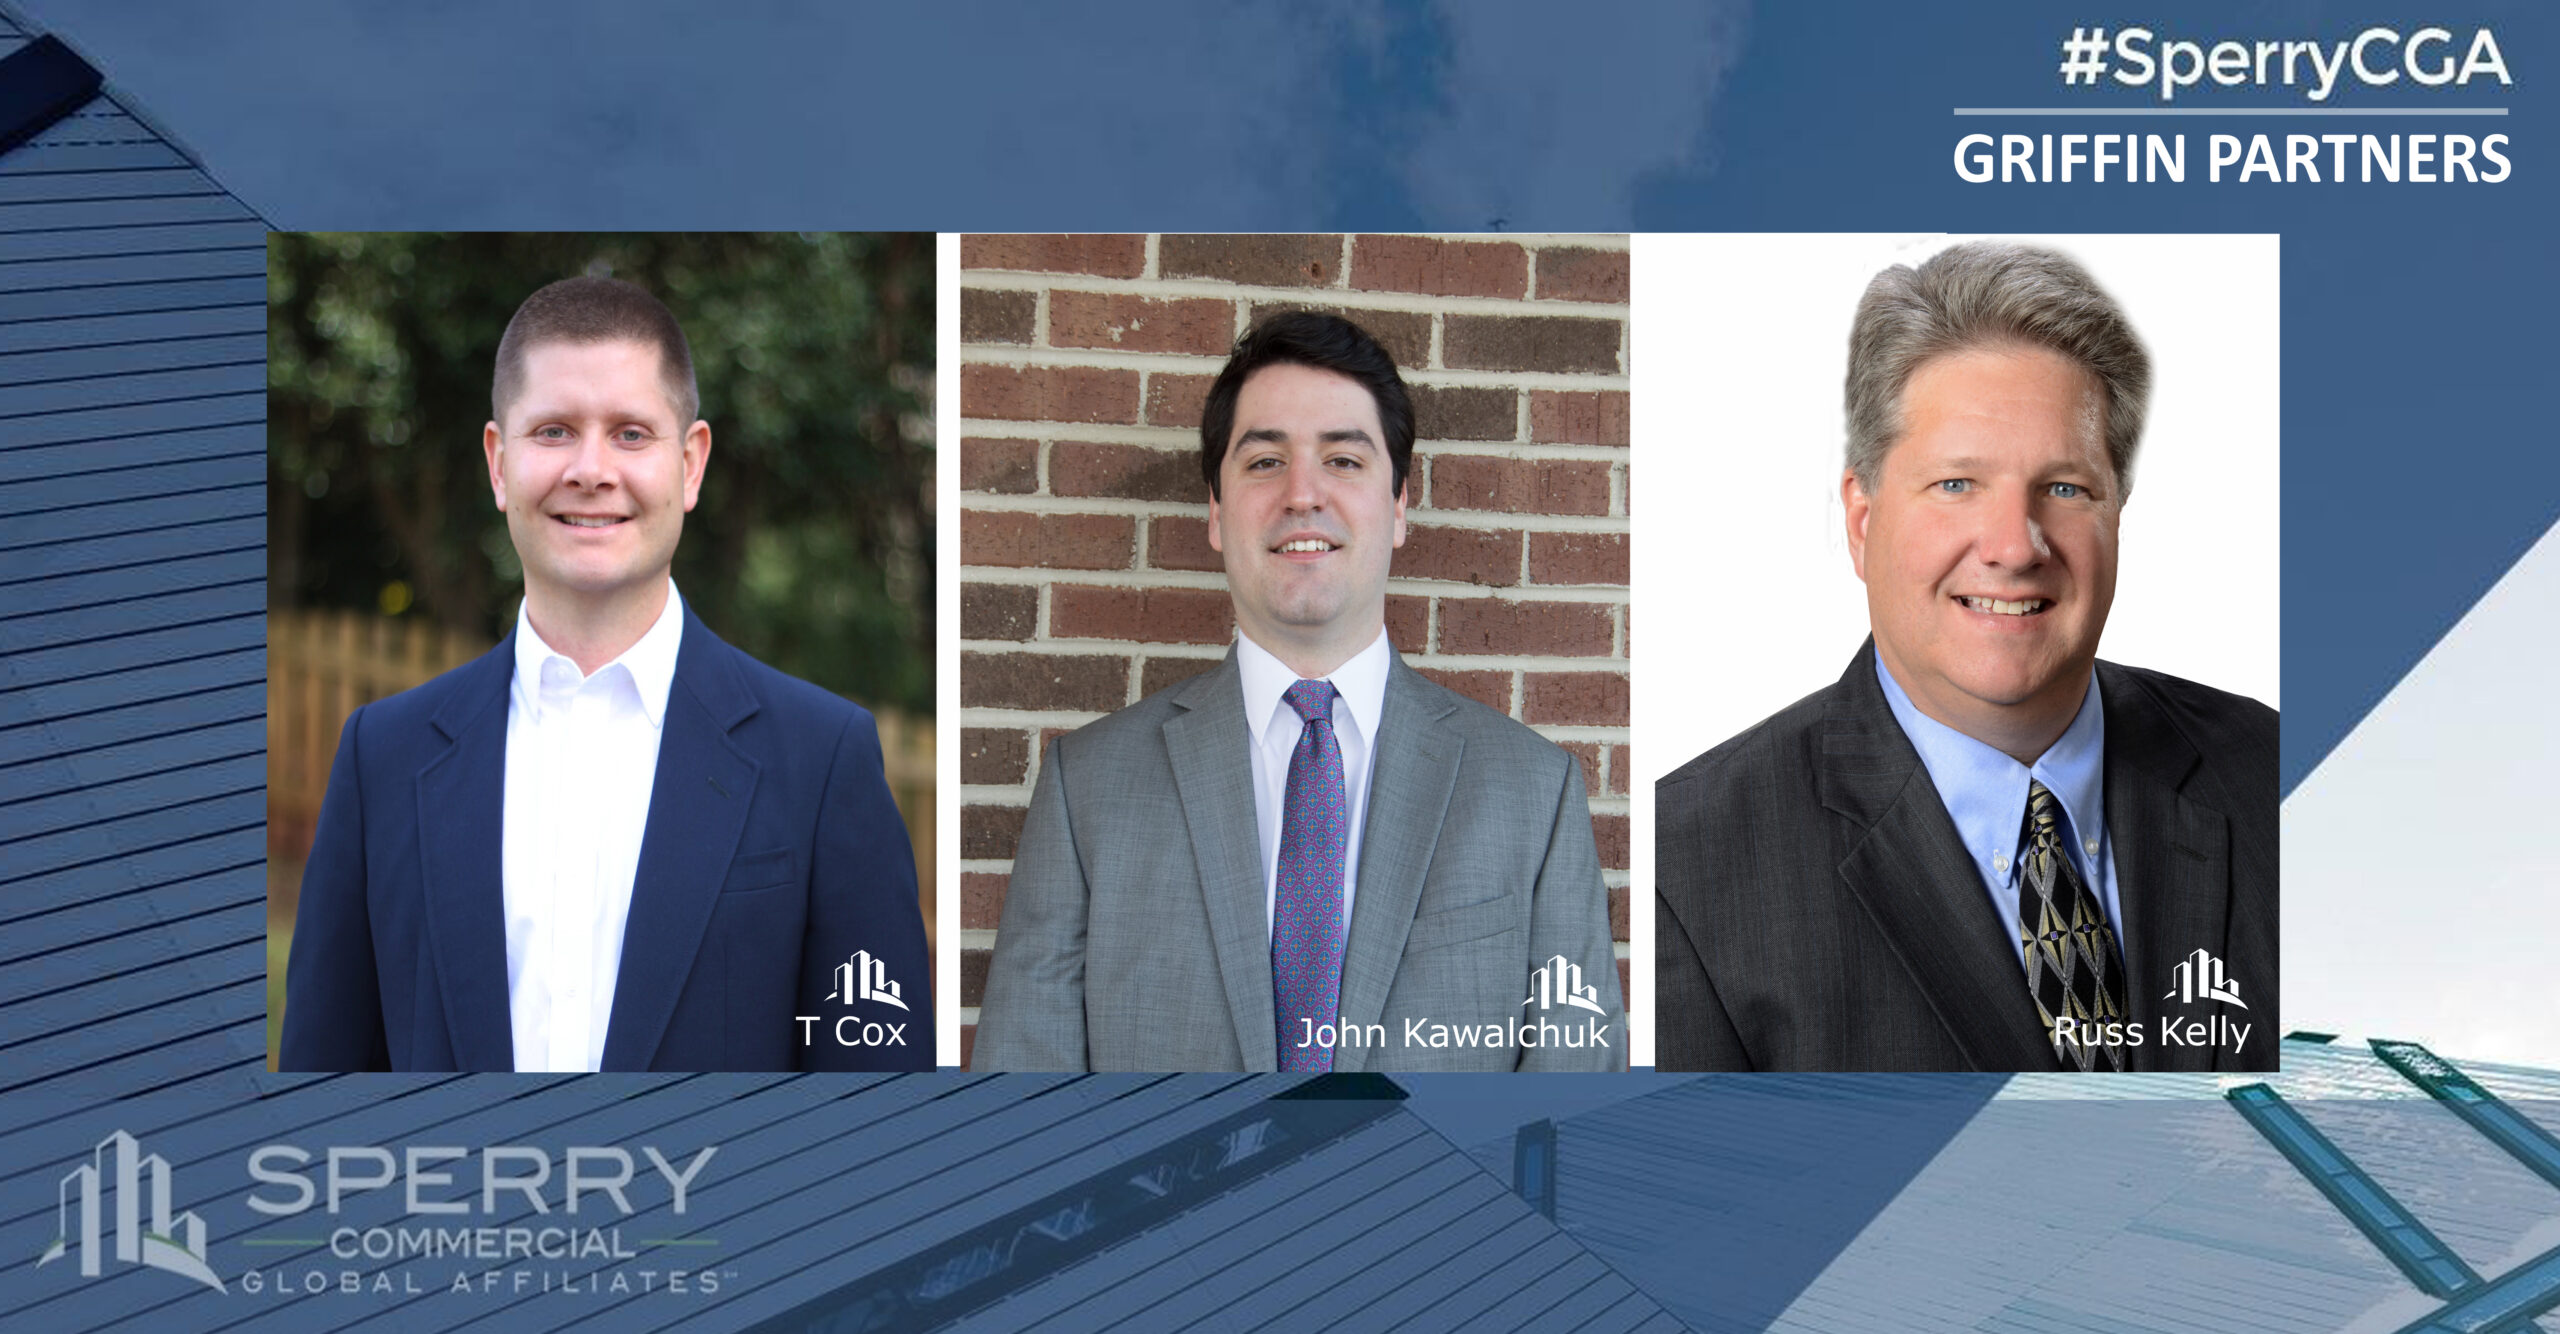 Sperry Commercial Global Affiliates  – Griffin Partners Welcomes New Associates